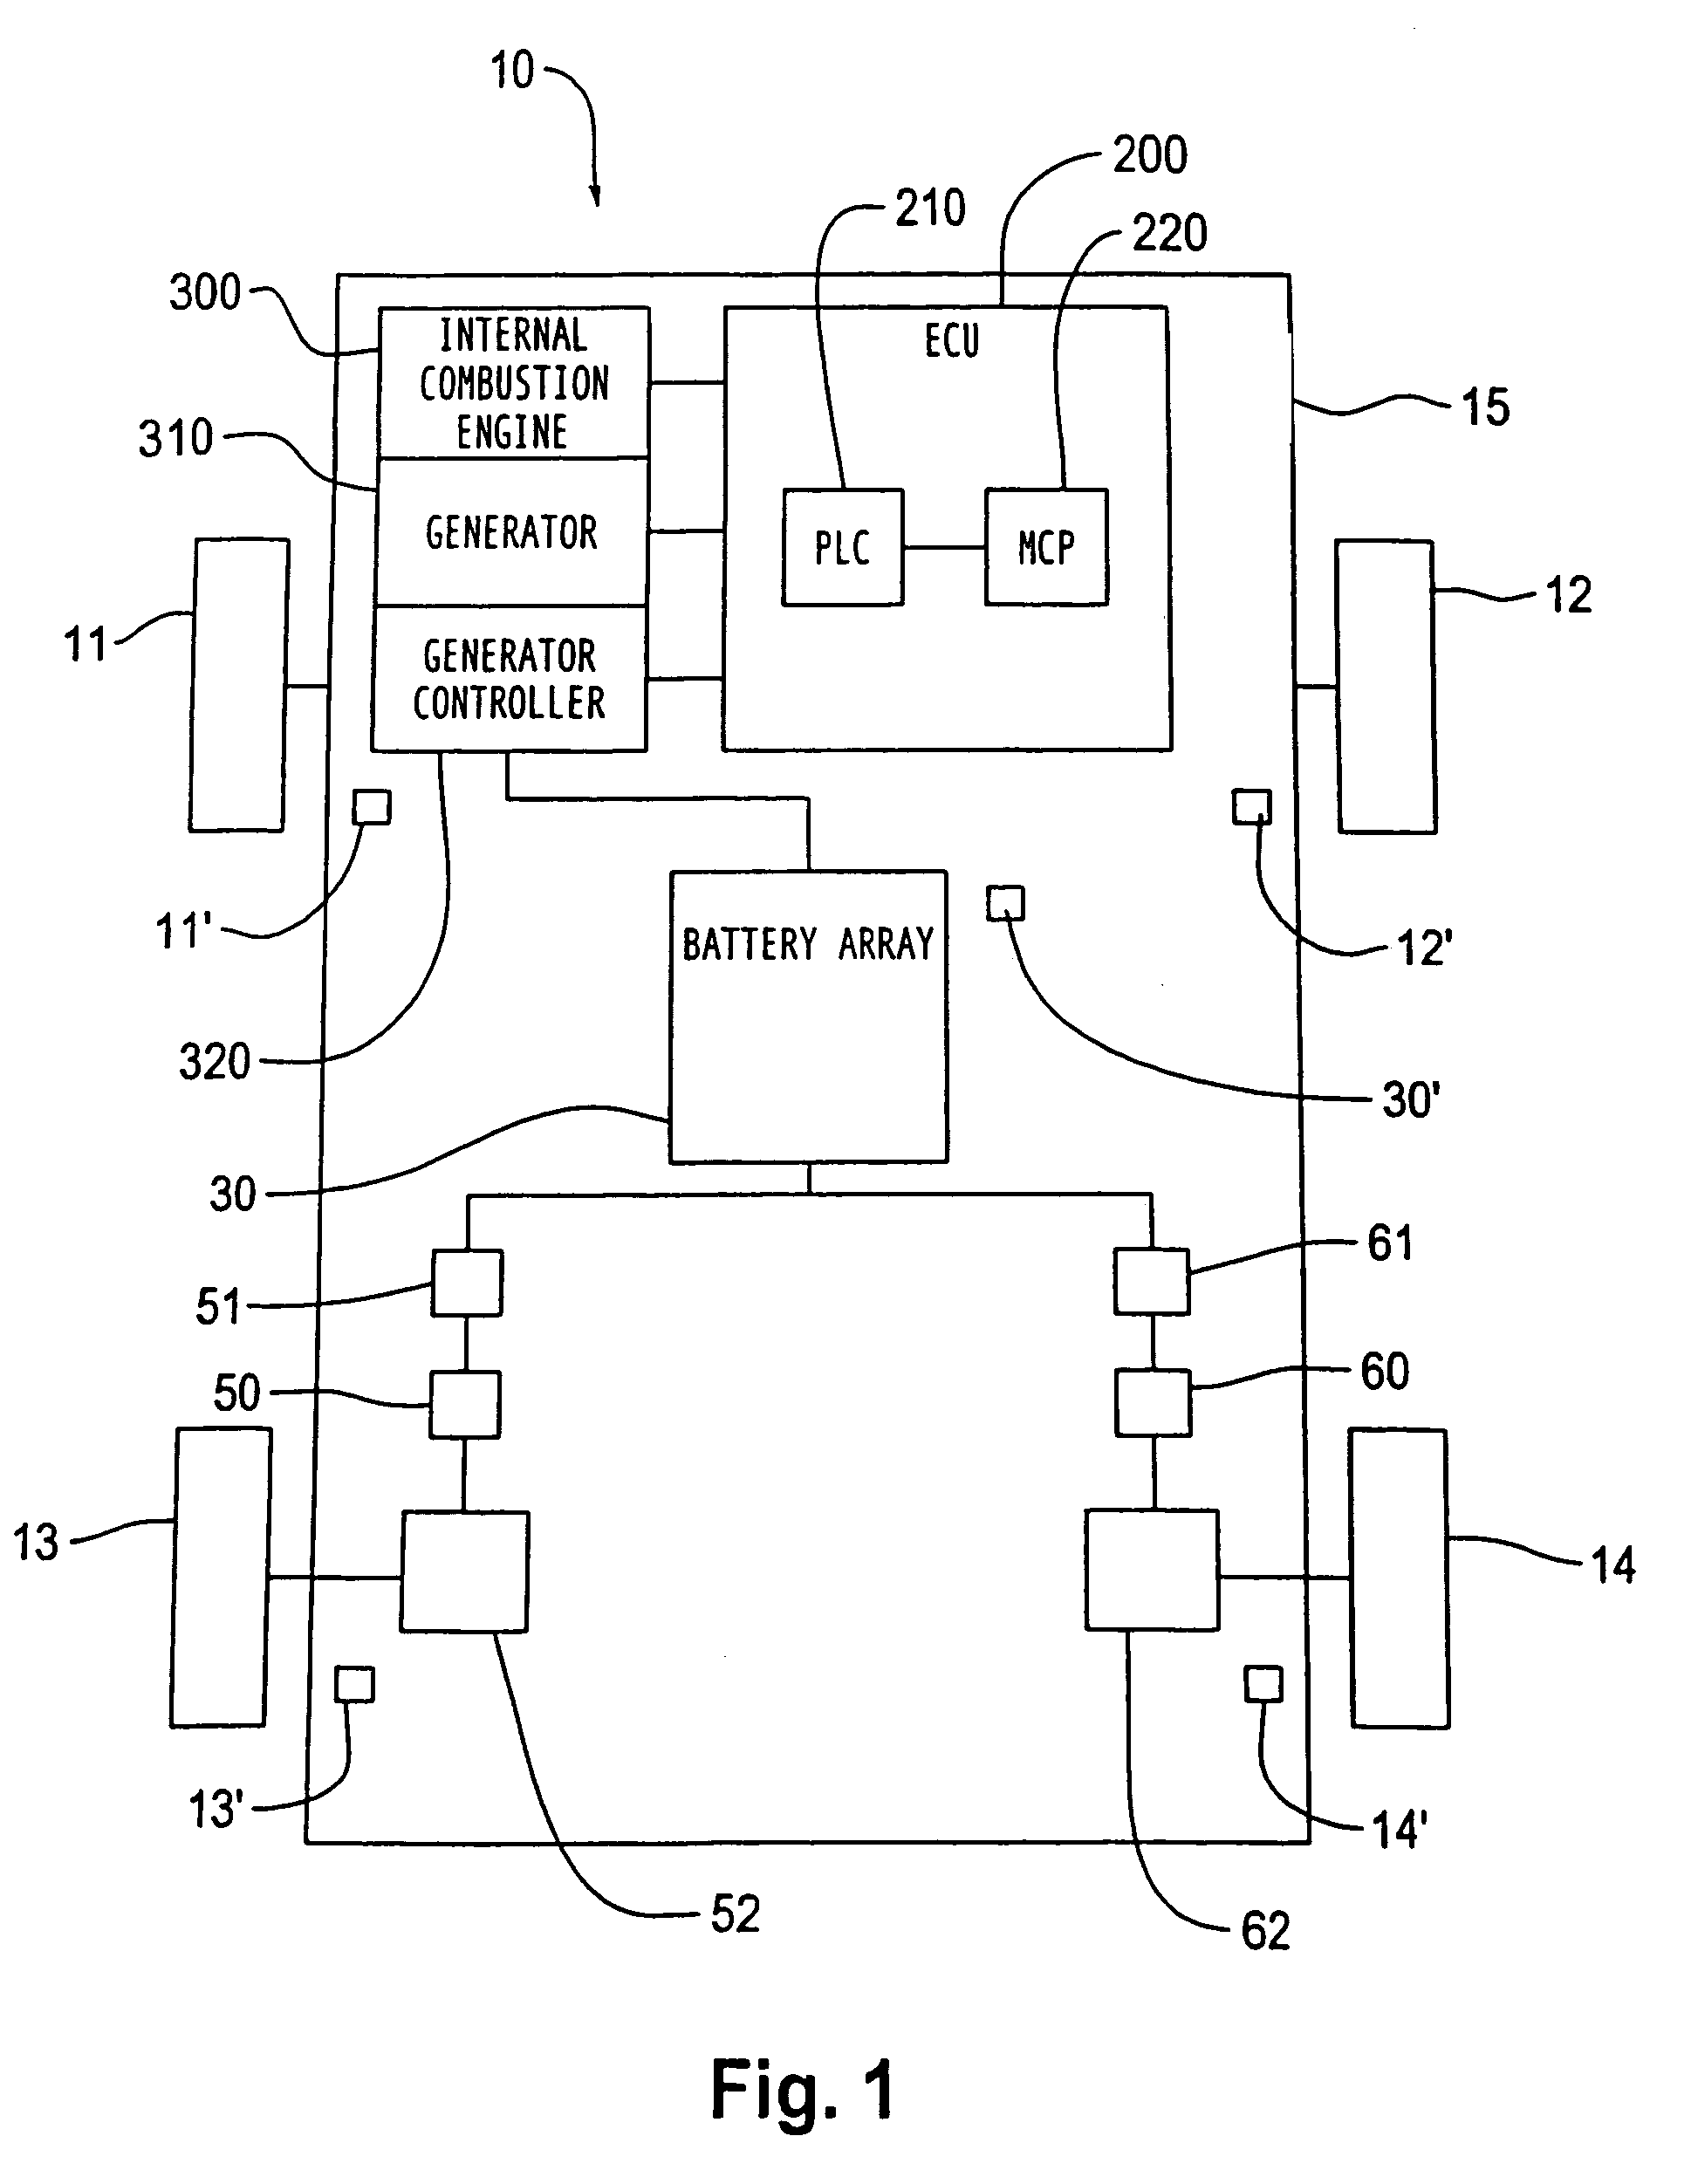 Method and apparatus for selective operation of a hybrid electric vehicle in various driving modes